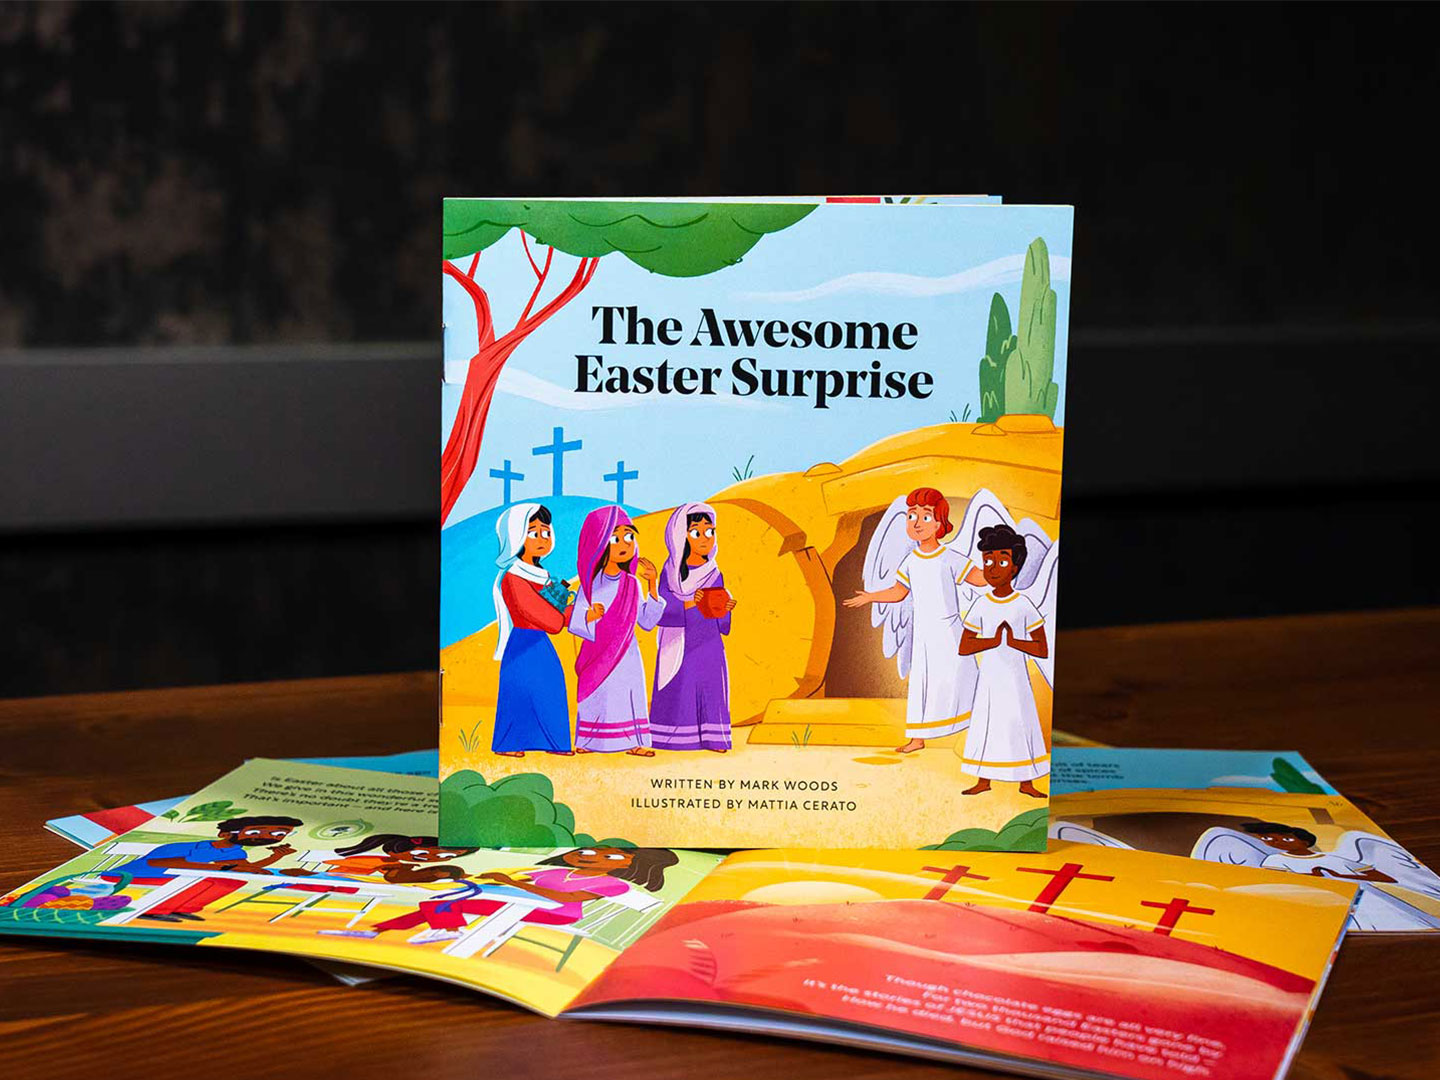 The Awesome Easter Surprise